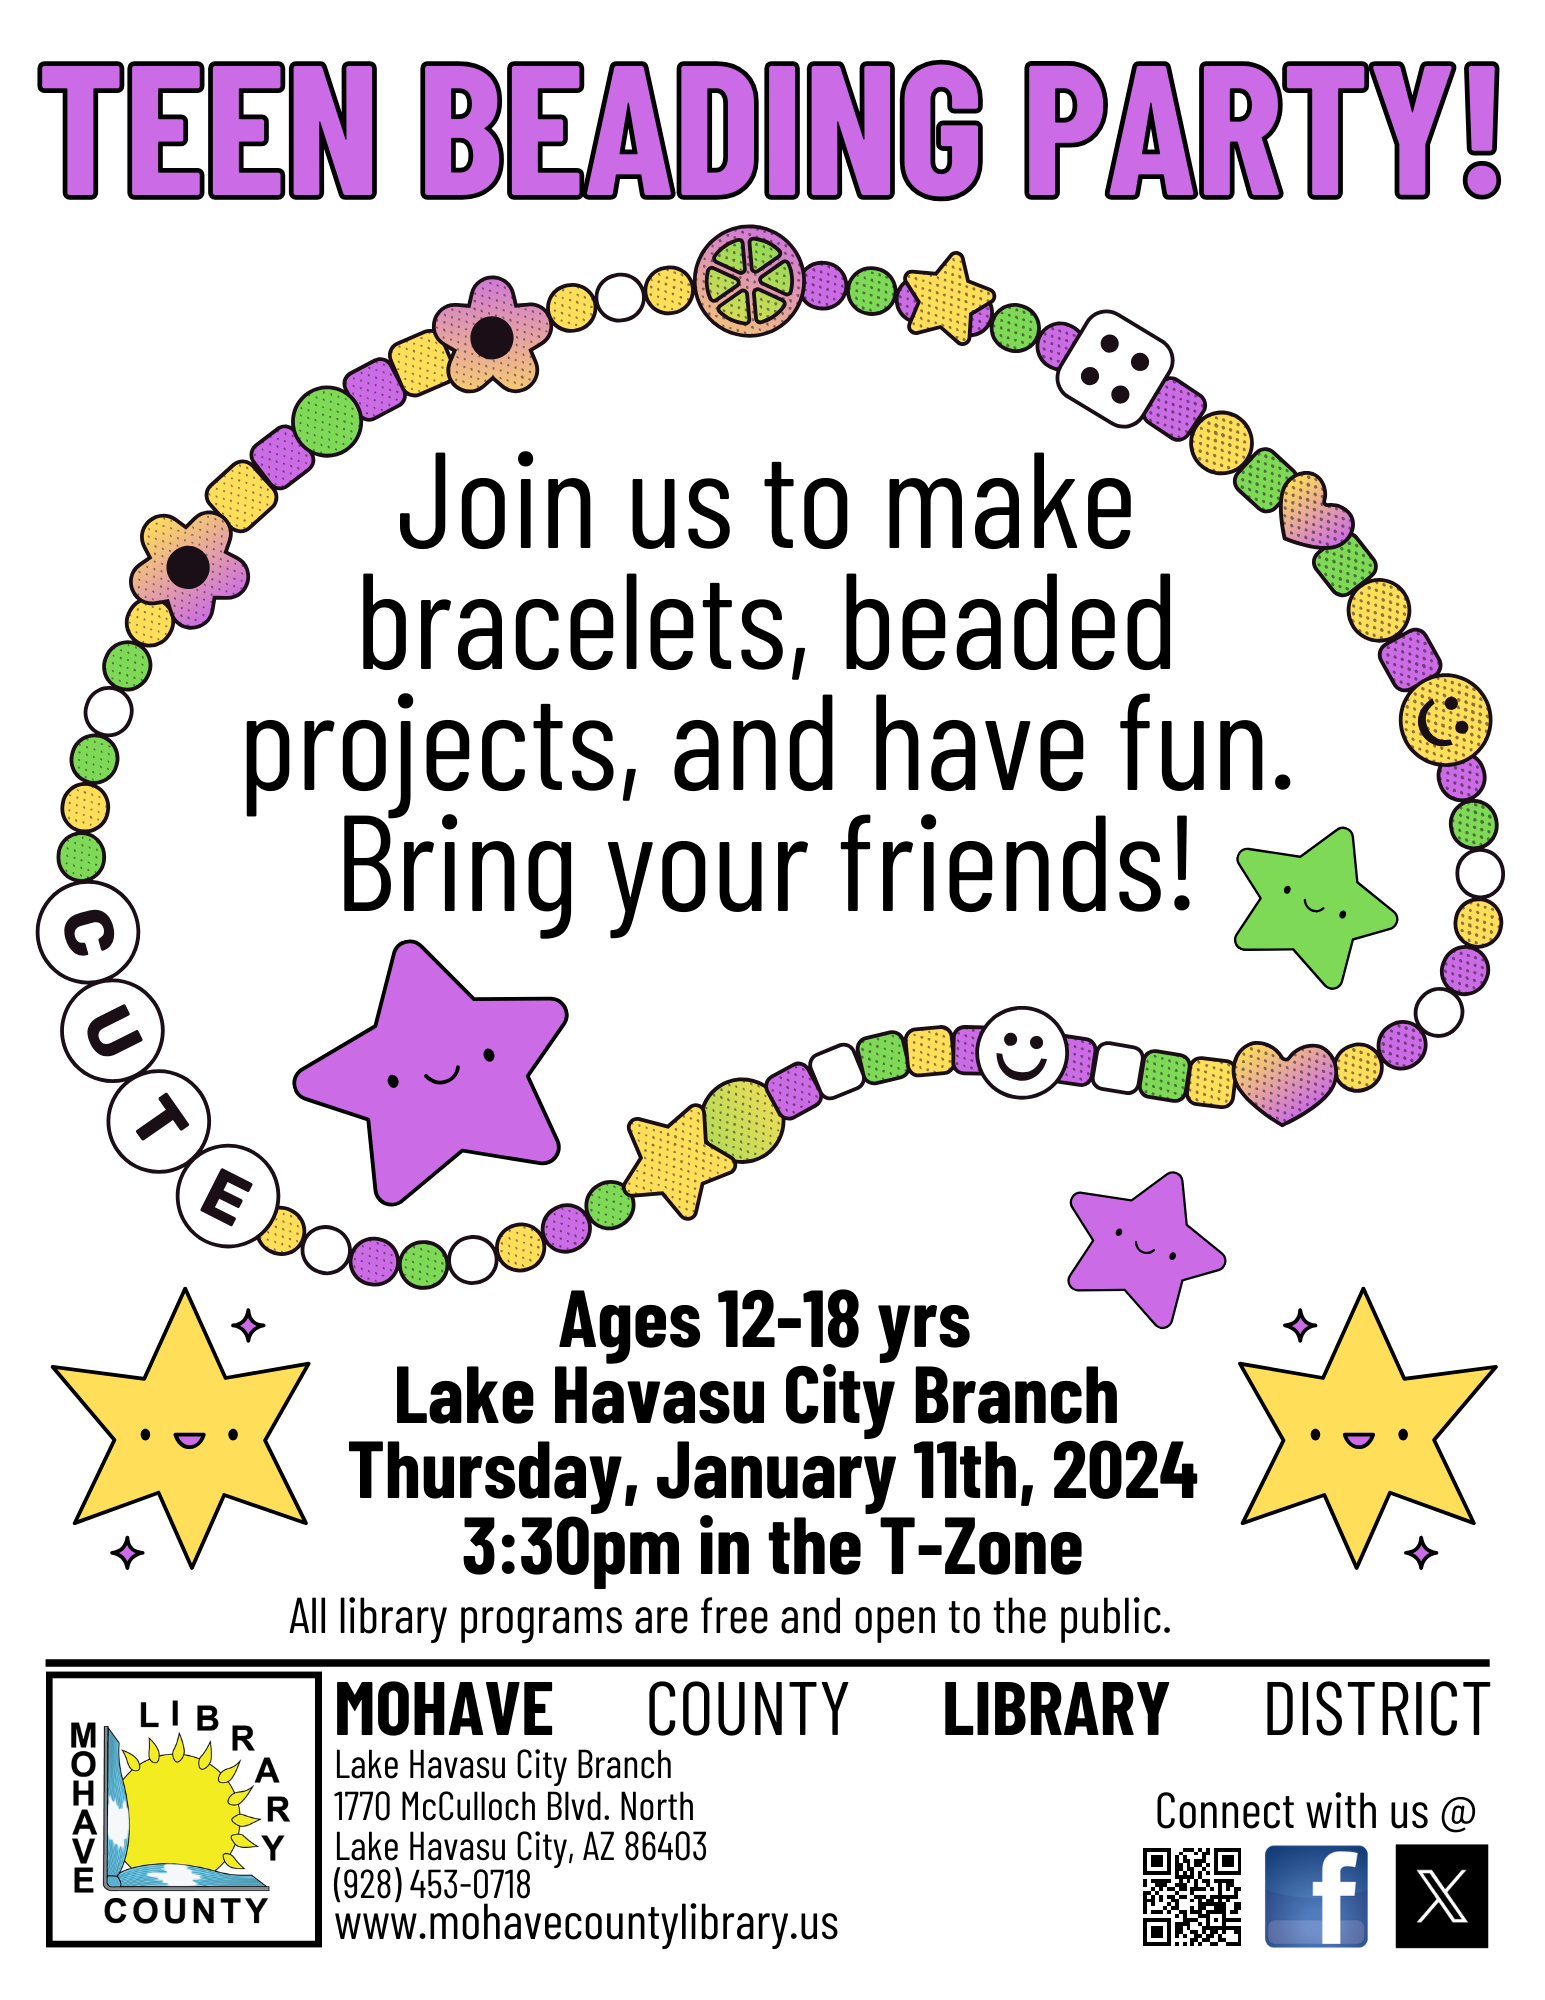 Teen Beading Party at the Library